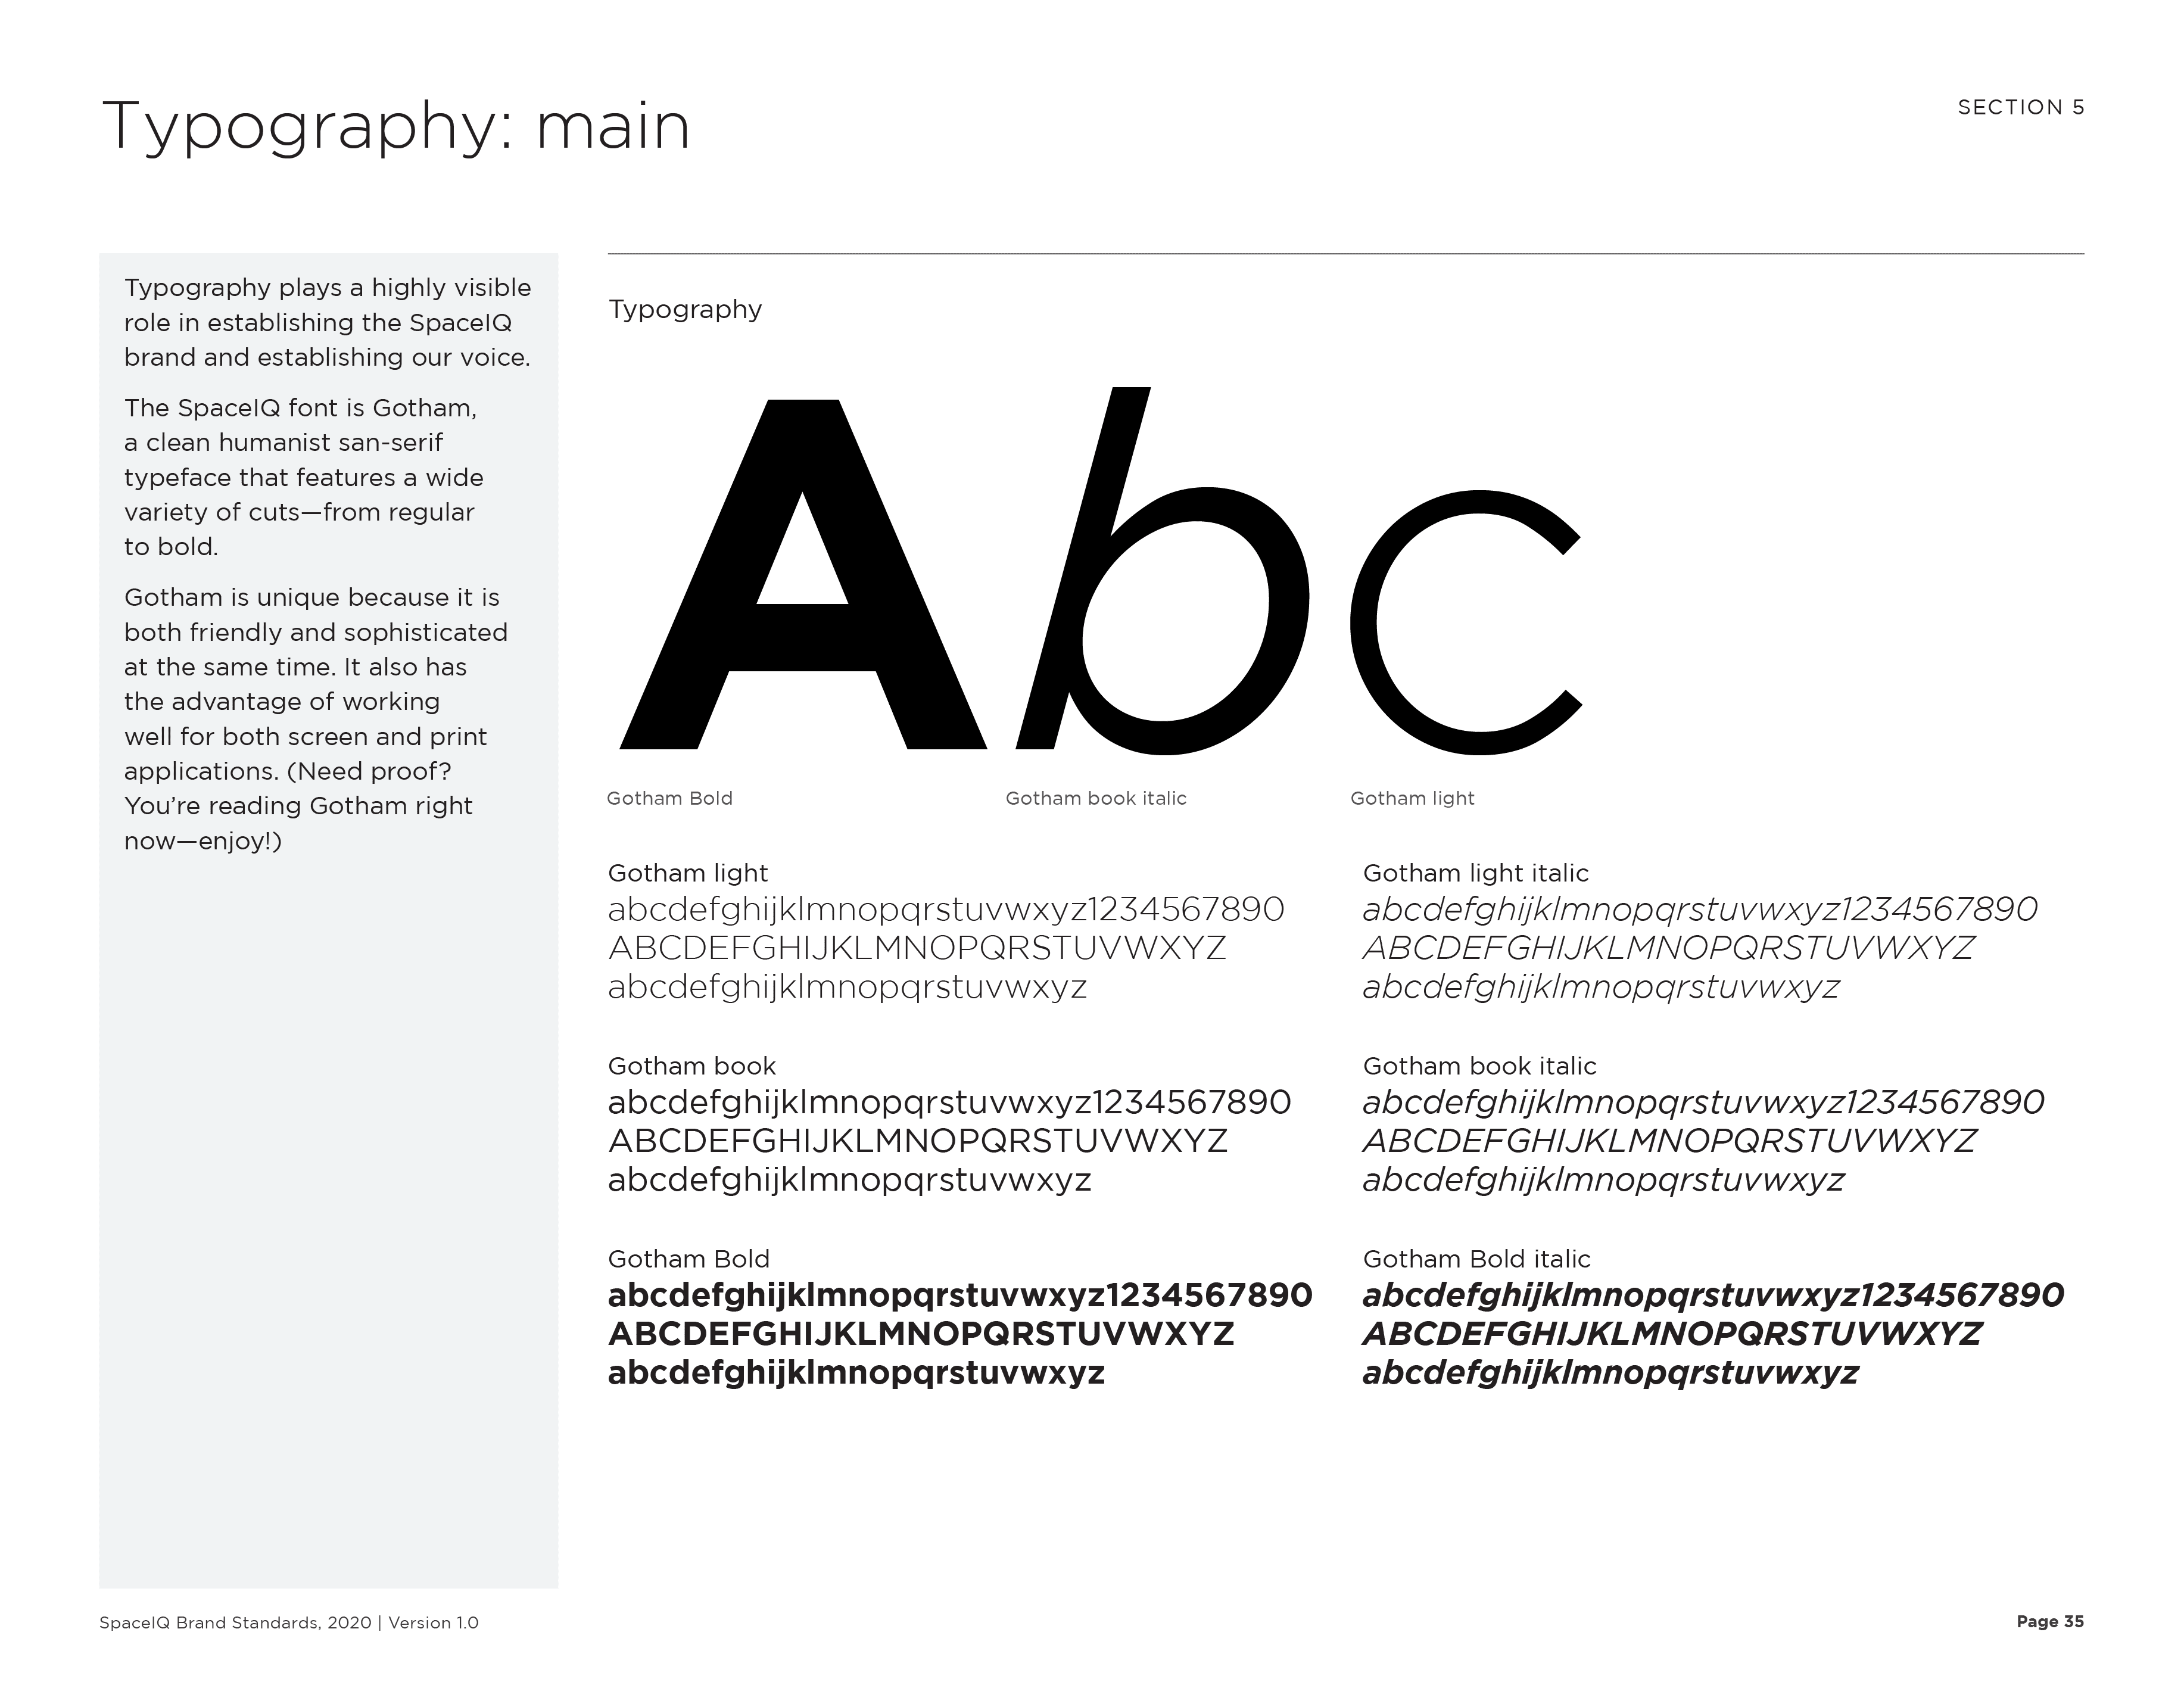 SpaceIQ Brand Guidelines Typography